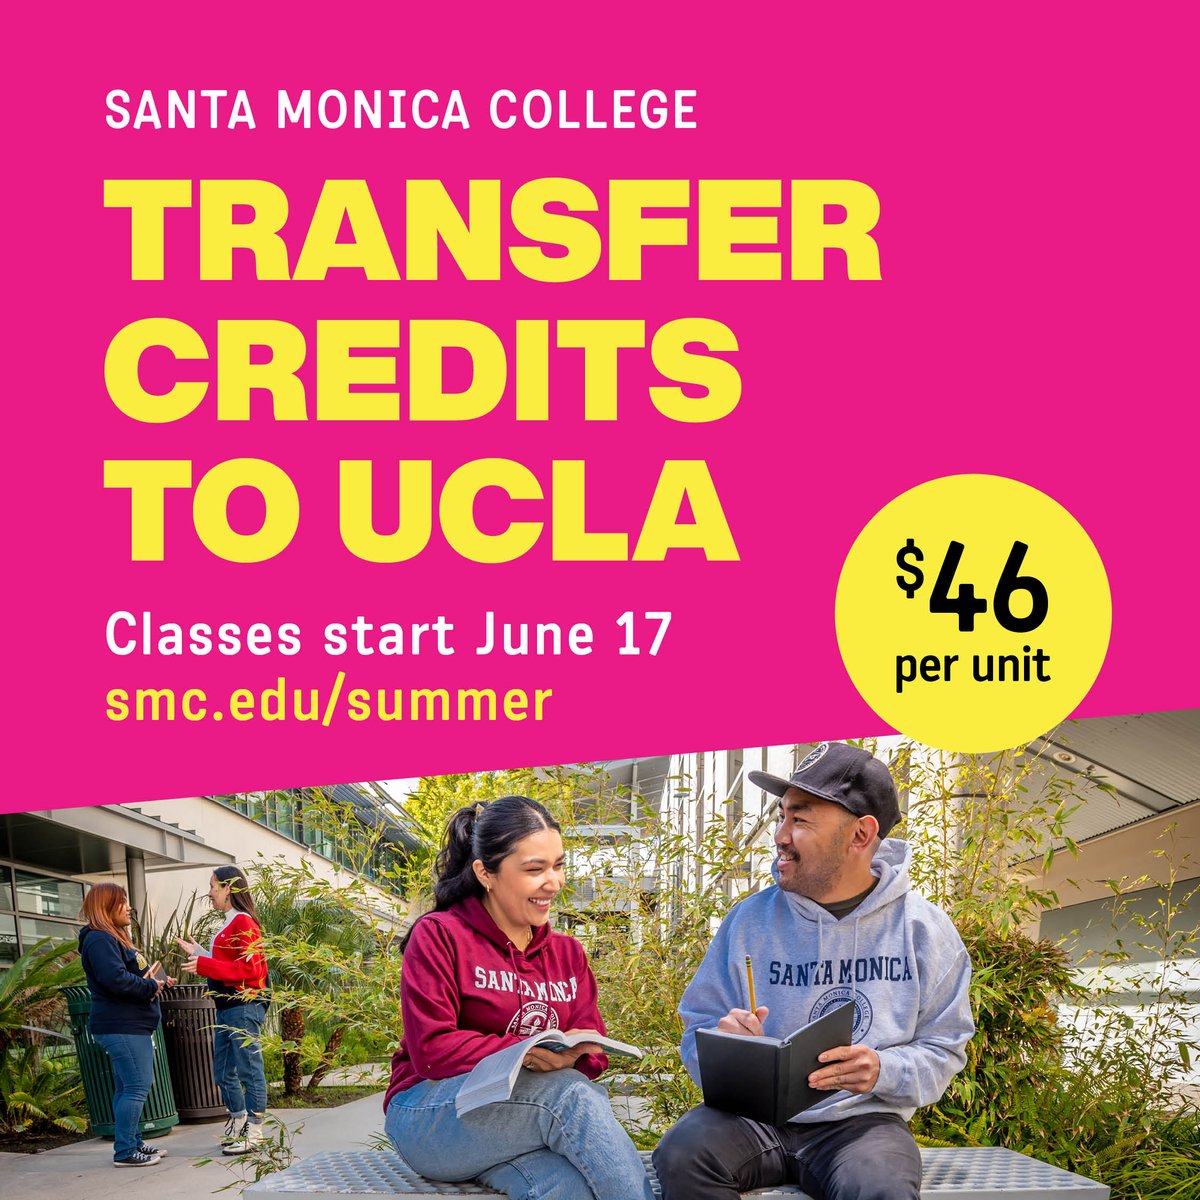 Sponsored: Enroll now for summer classes at Santa Monica College! Classes start June 17th. 3-unit summer courses cost less than $200, which is much cheaper than classes at nearby 4-year universities. smc.edu/summer